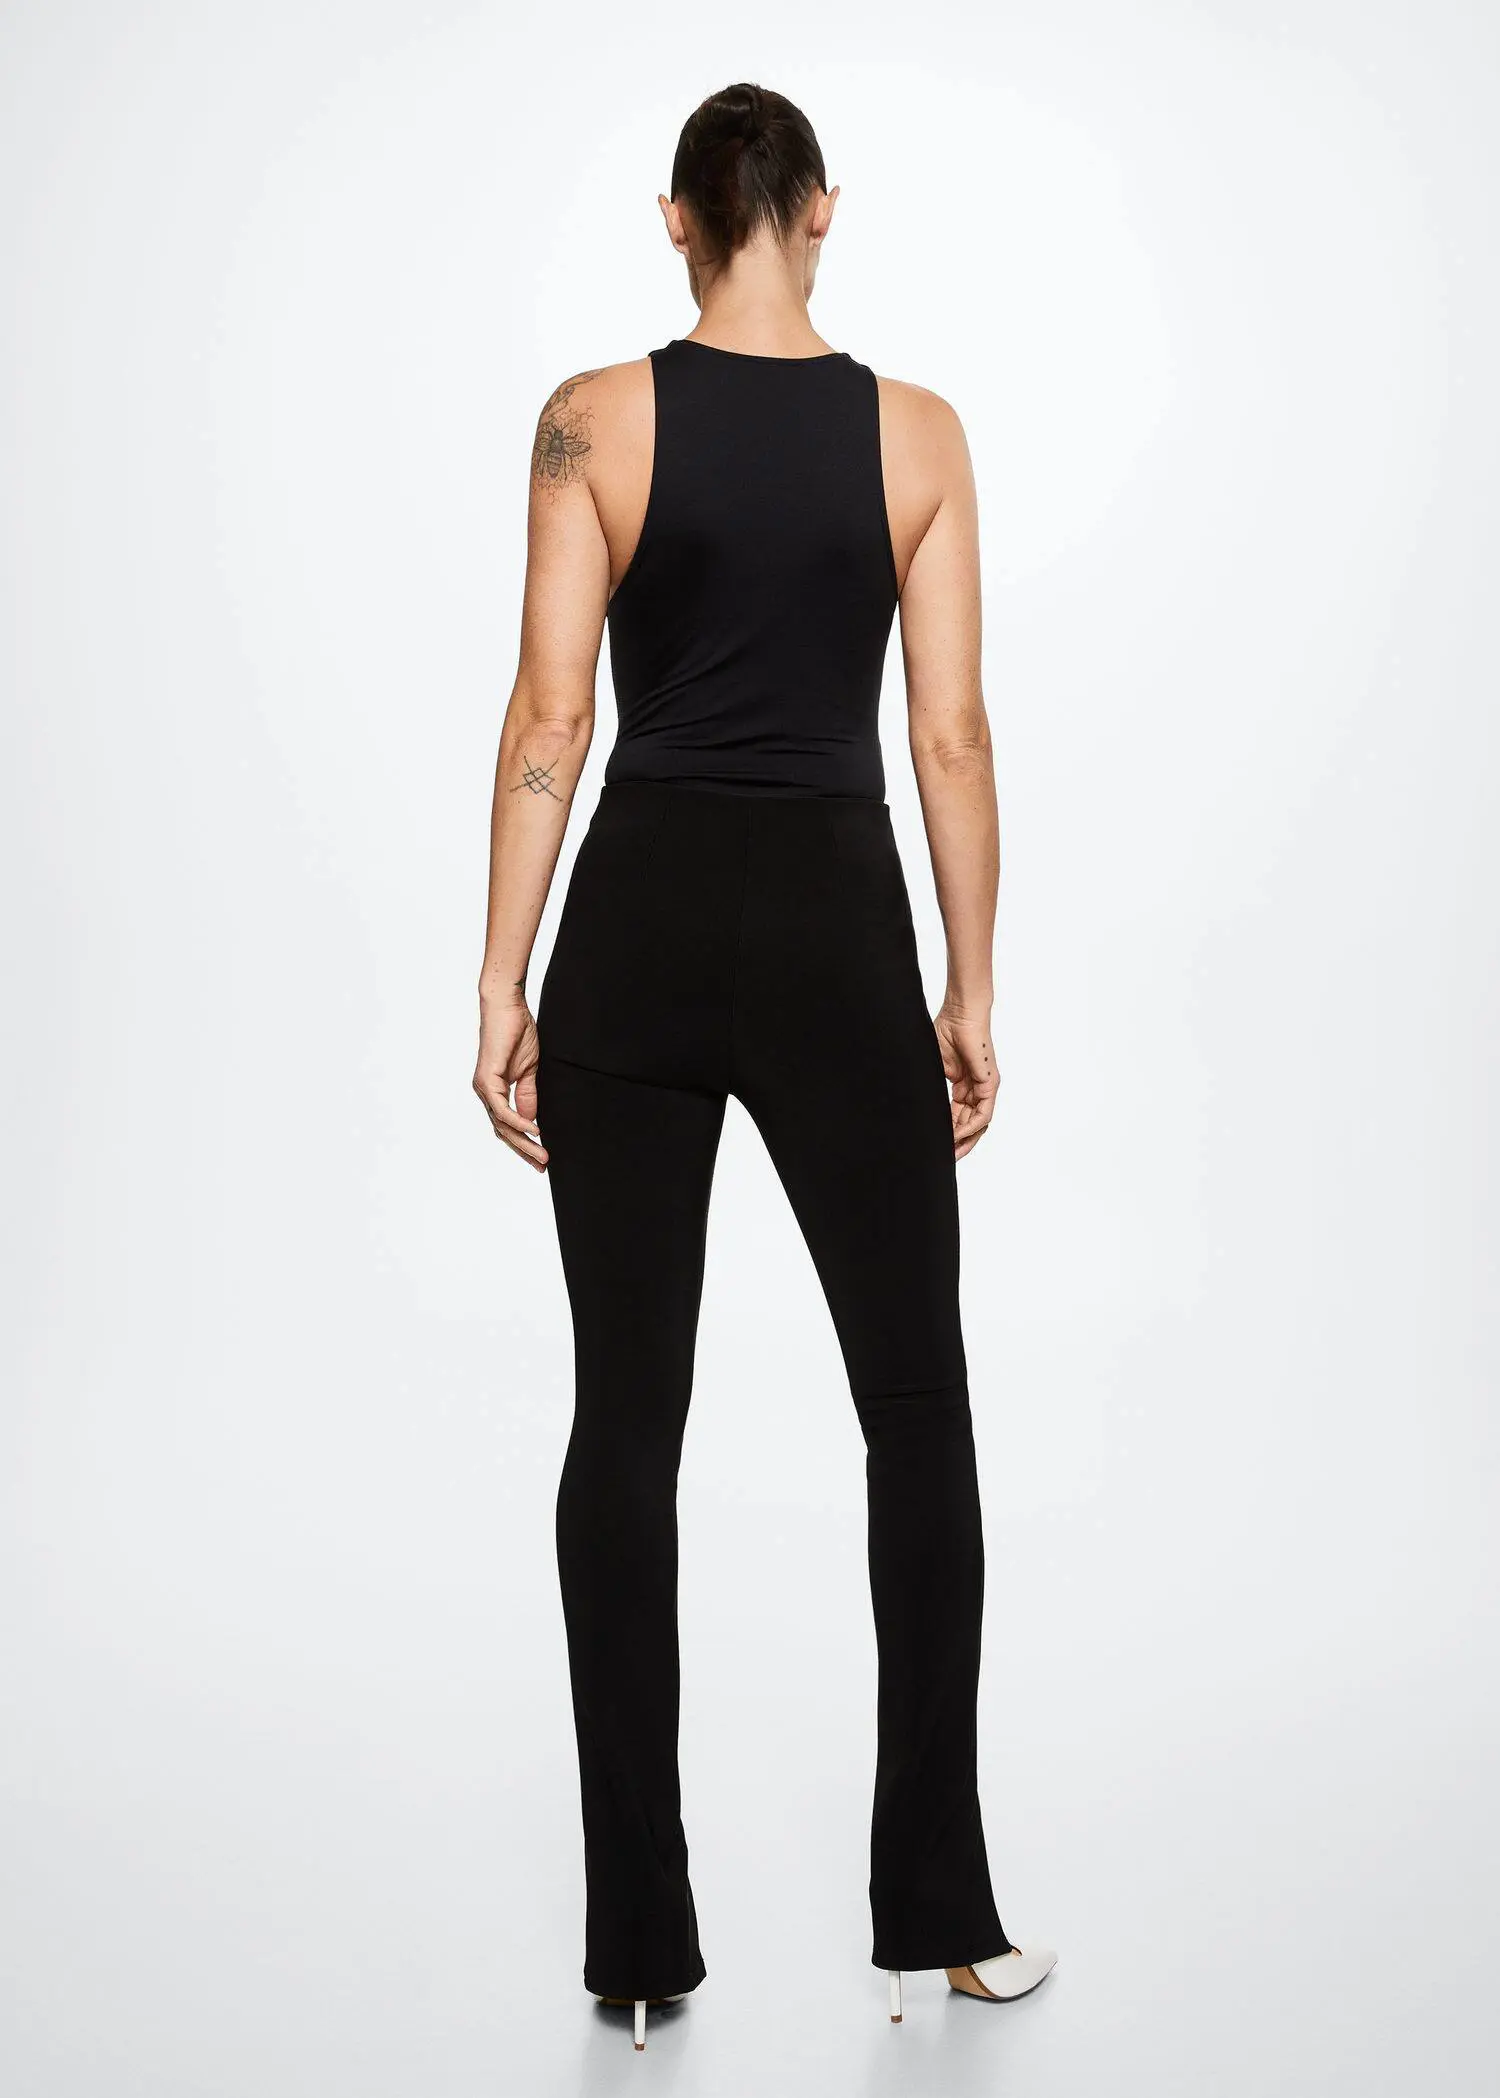 Mango Slit hem leggings. a person wearing a black outfit standing in a room. 